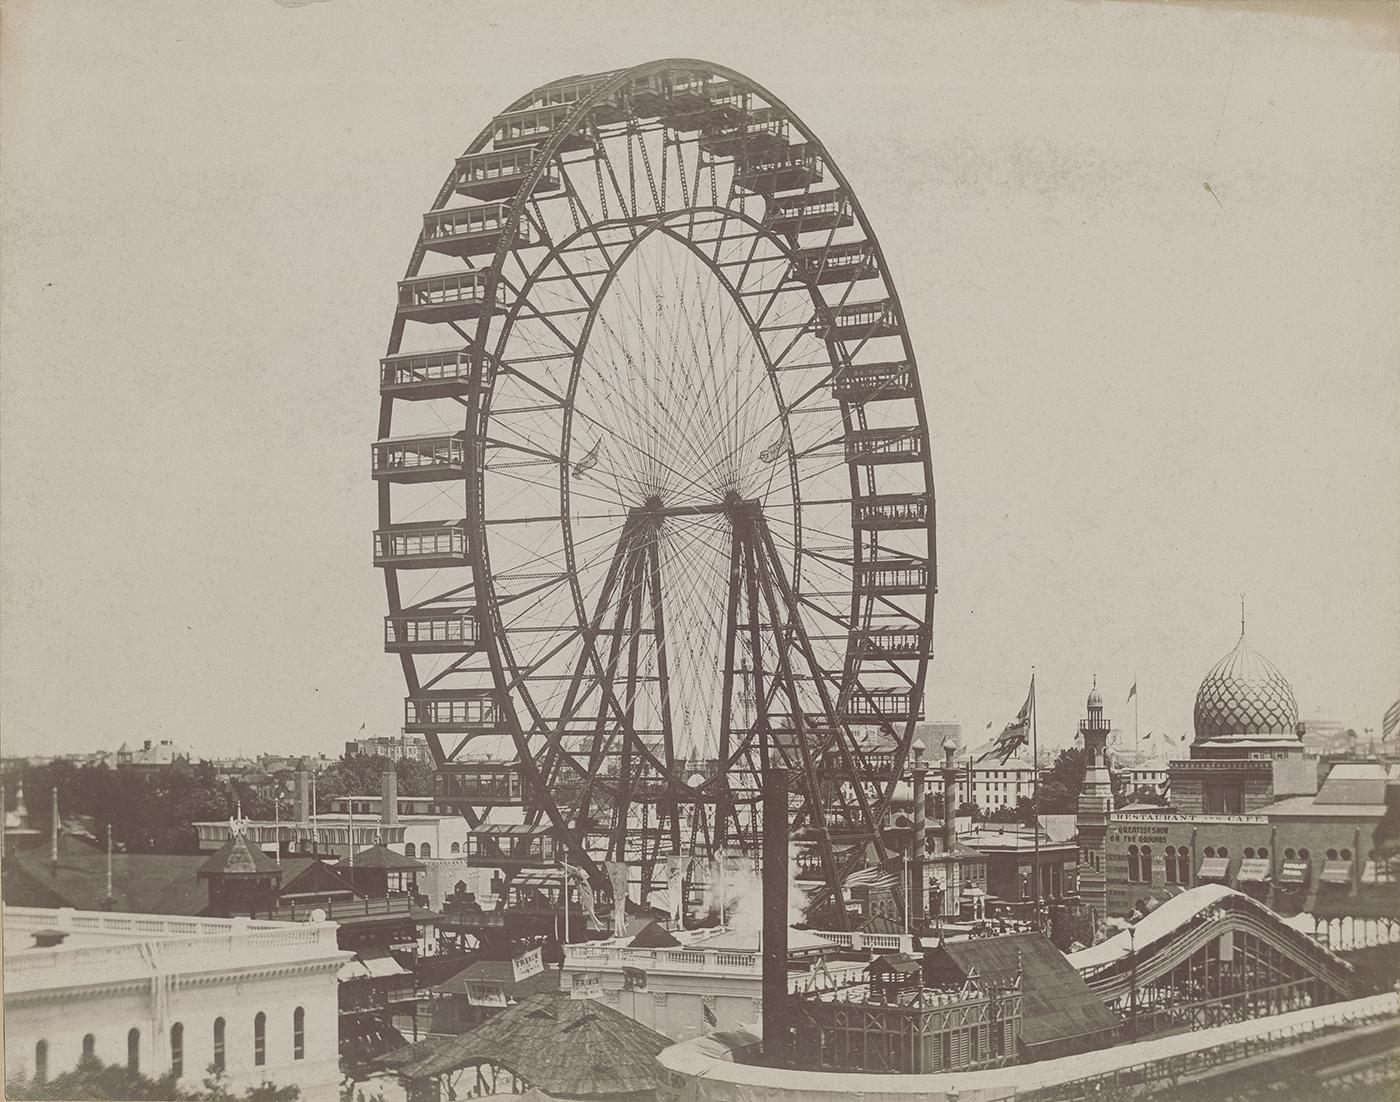 The first Ferris Wheel towers over the Midway at the 1893 World's Columbian Exposition in Chicago